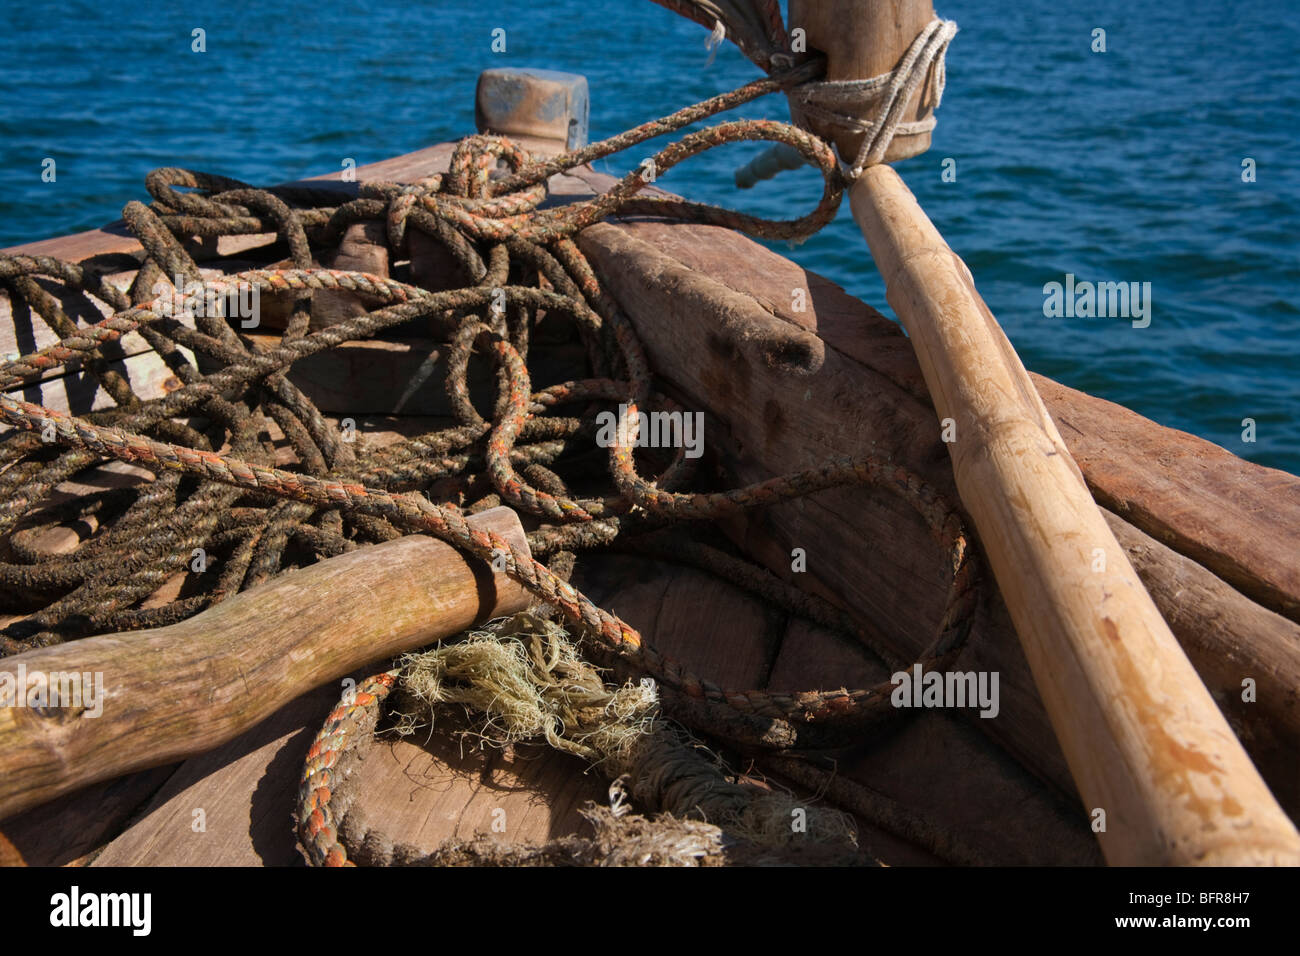 Rope curled up in the prow of a boat Stock Photo